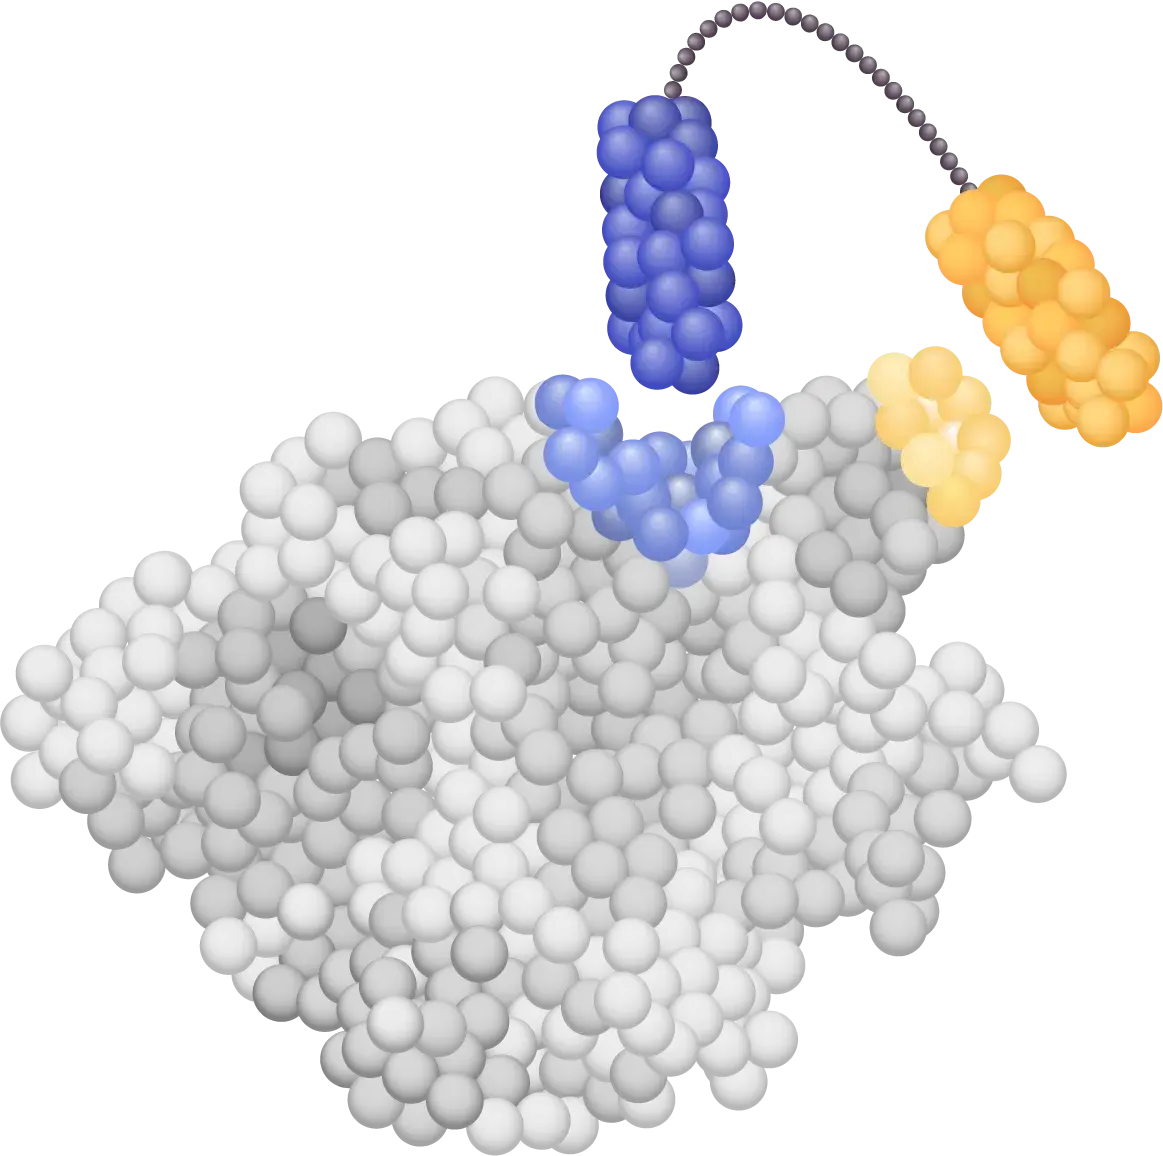 Illustration of an attobody, a next-gen nanobody, binding to an oncology or immune-mediated disease target protein using spatial positioning technology.